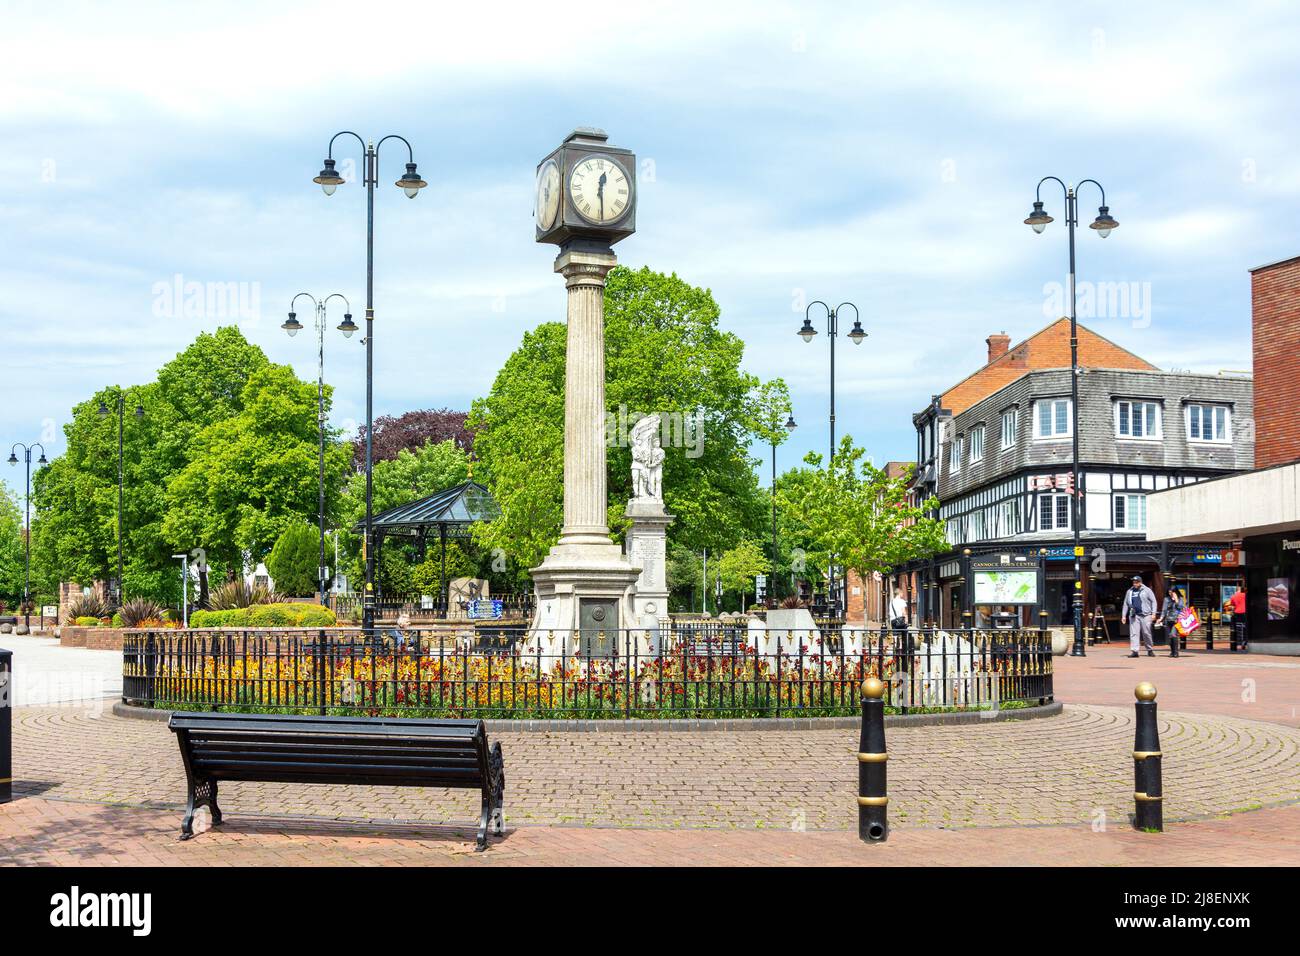 Memorial Clock, Market place, Cannock, Staffordshire, Angleterre, Royaume-Uni Banque D'Images